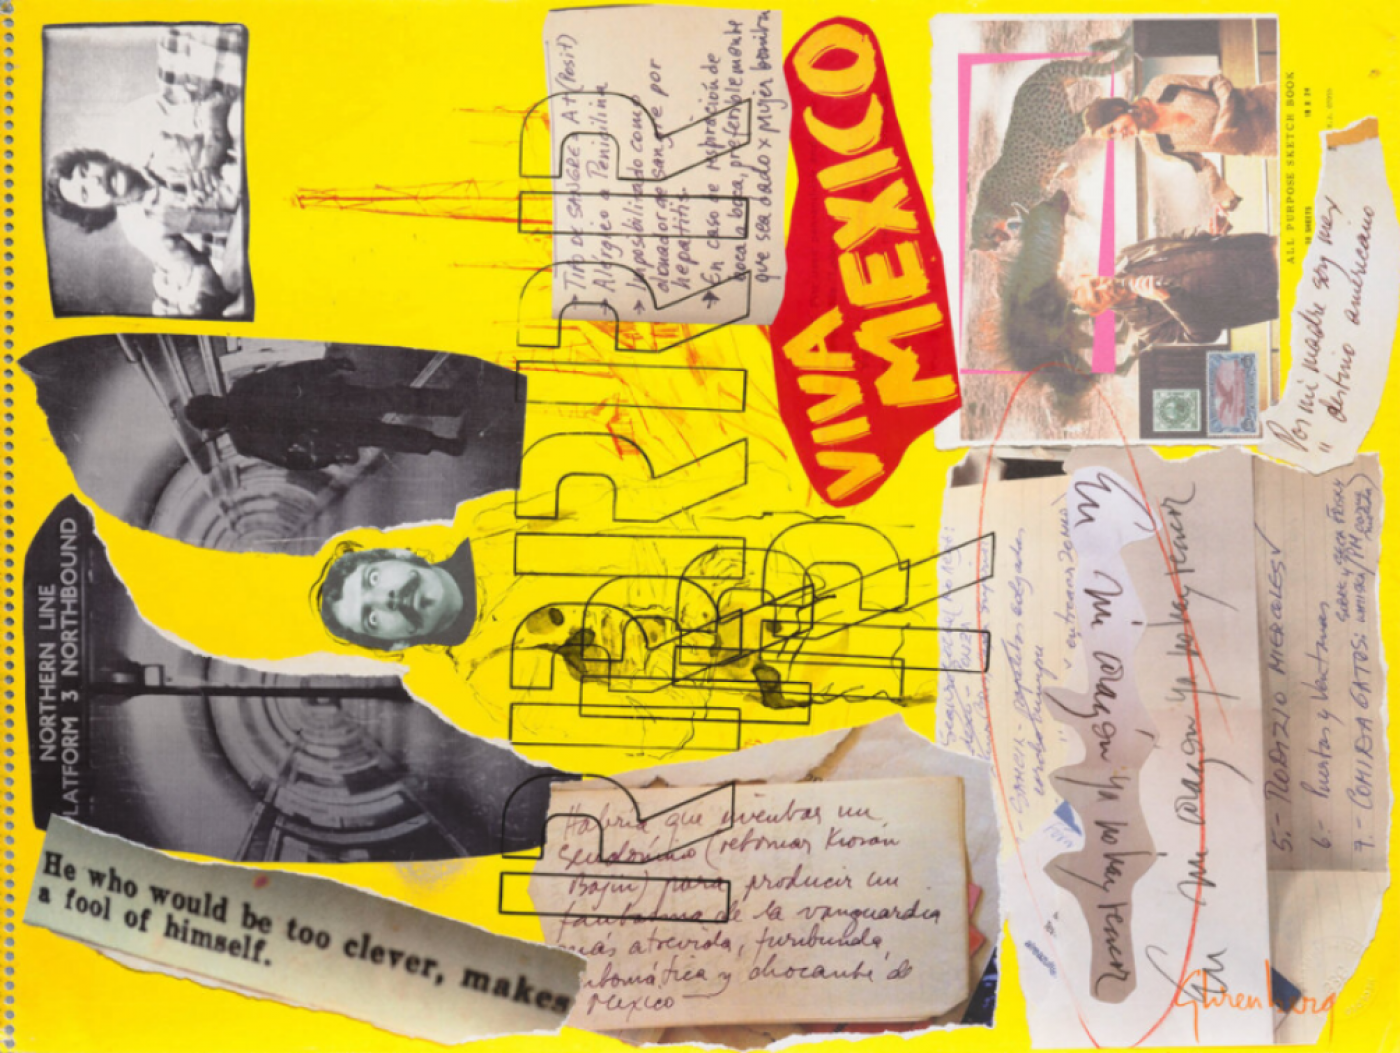 A collage showing fragments of photographs, notes, newspaper clippings, overlaid with stenciled text.